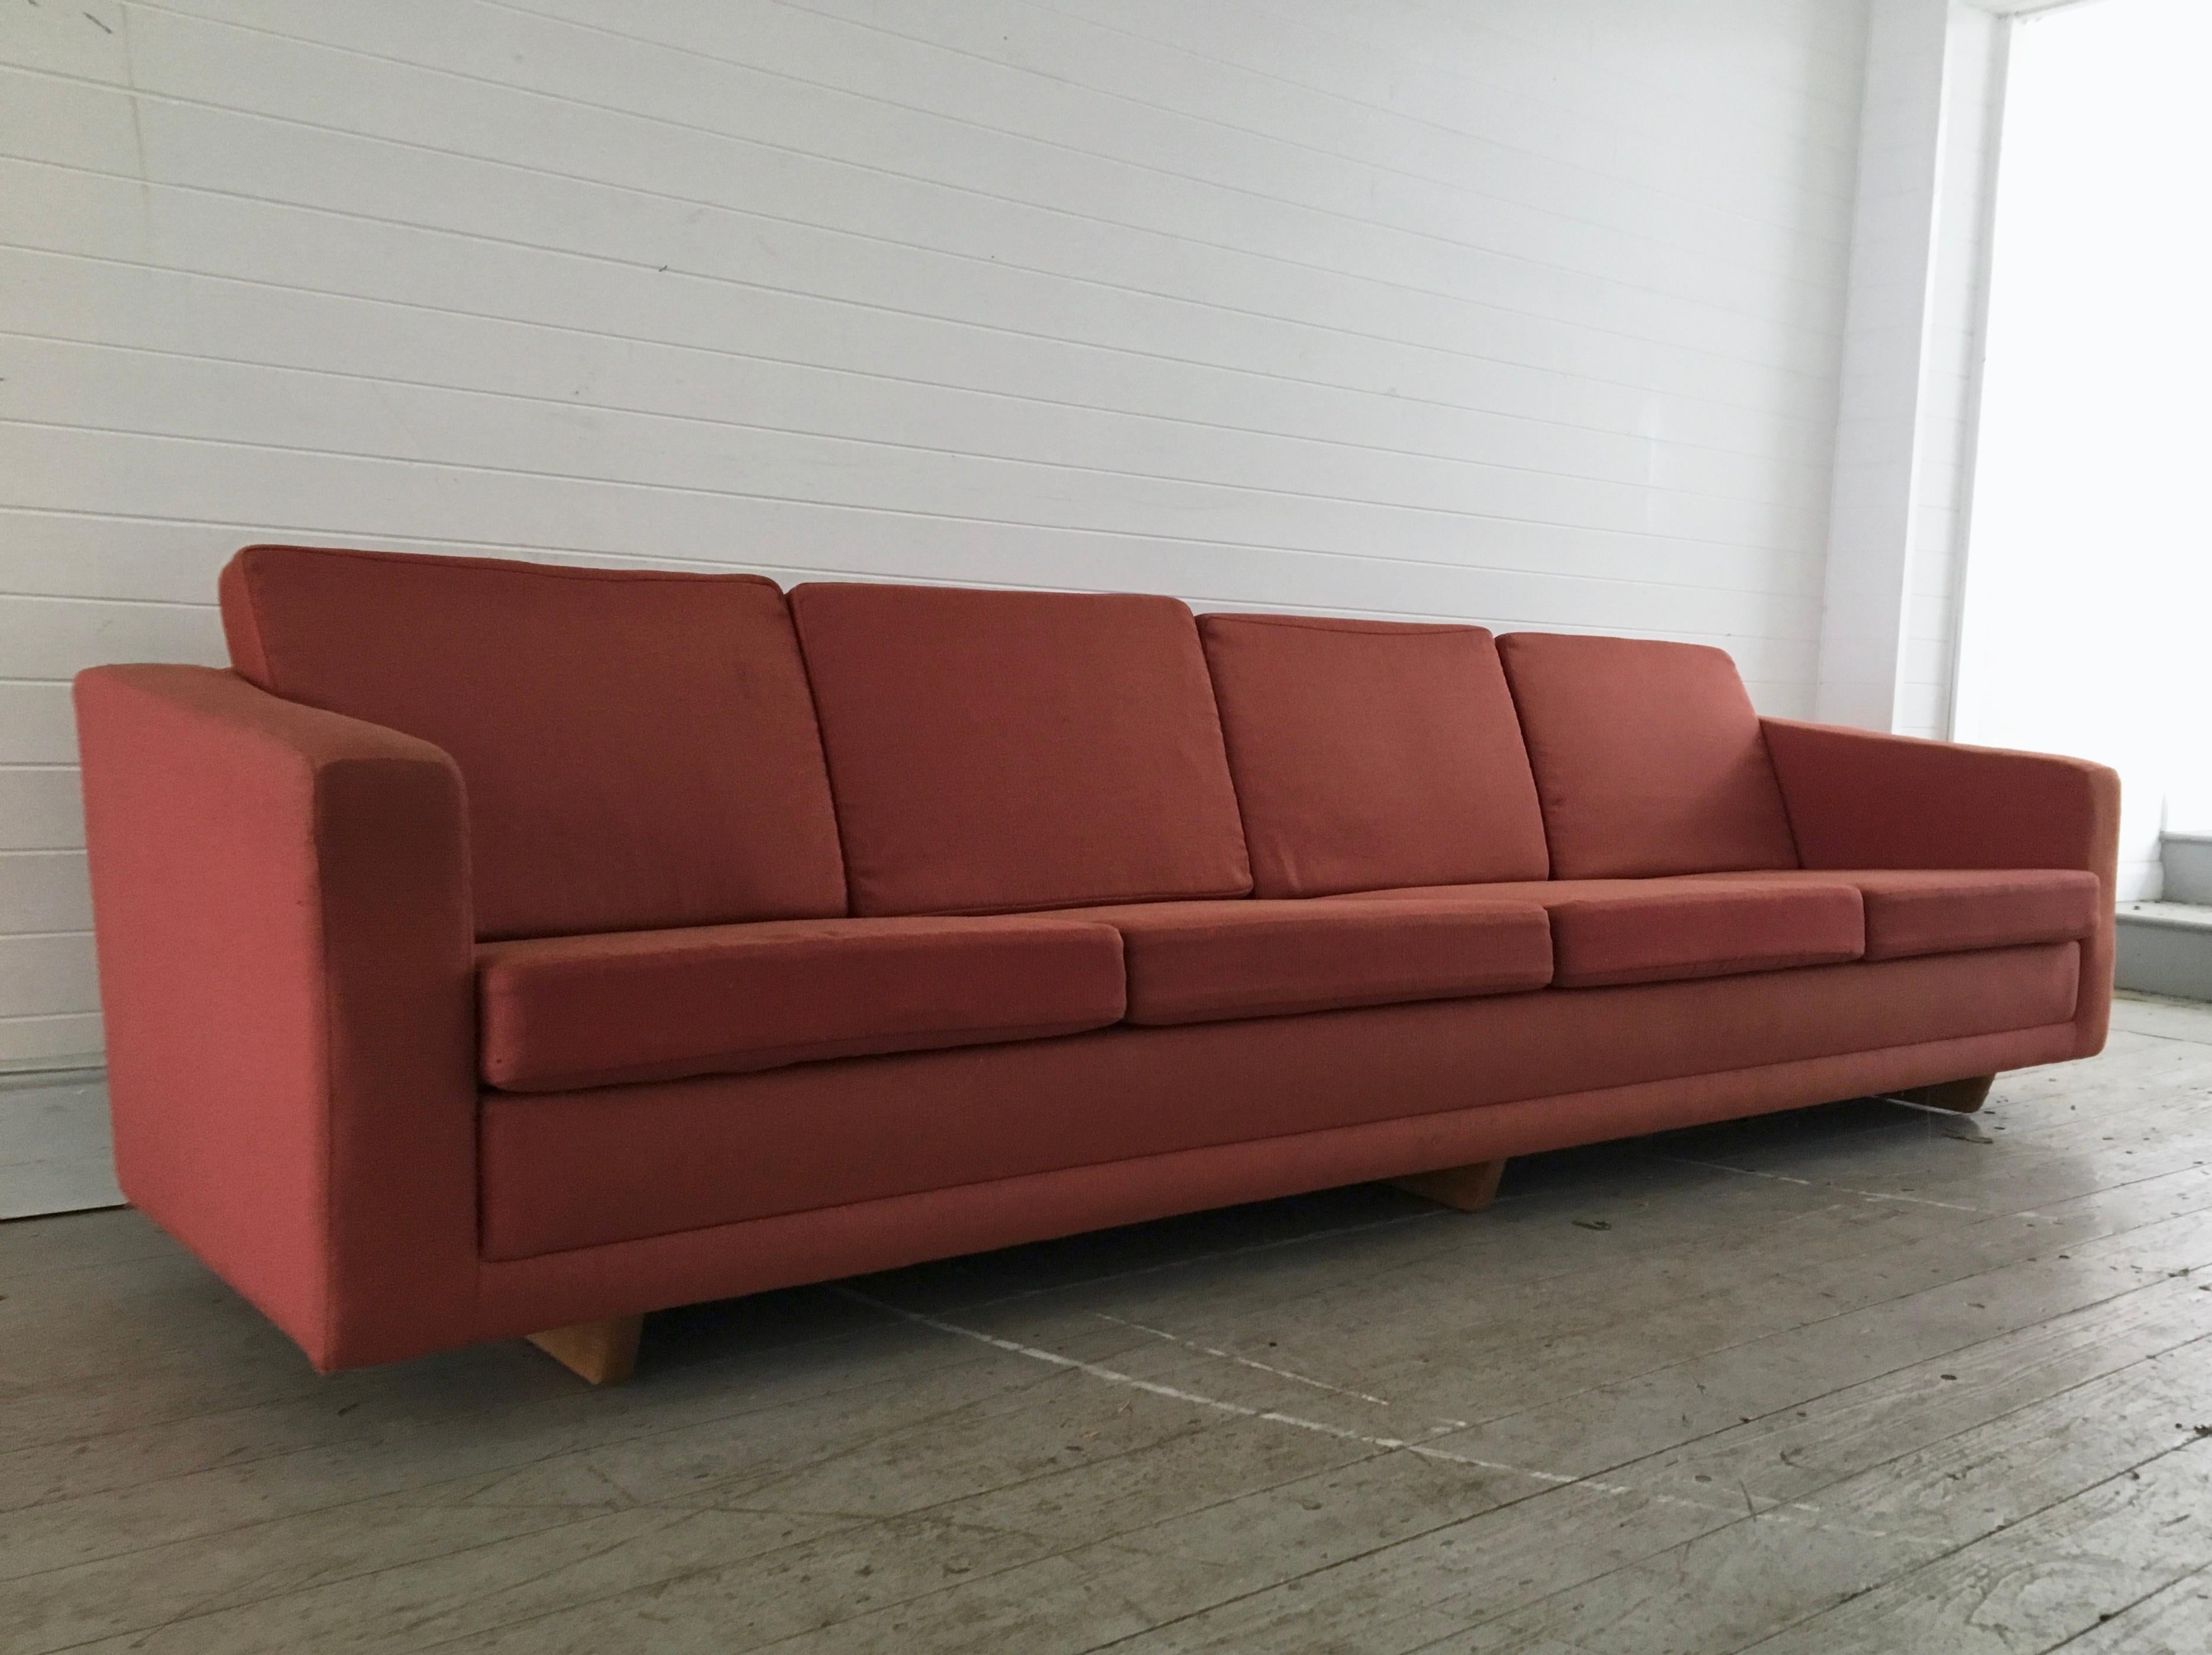 Exquisite, long, 4-Seat sofa designed by Danish icon Borge Mogensen for Fredericia Mobler, circa 1960. Original red wool upholstery with 3 solid beech sleigh supporting legs.

Dimensions (cm, approx): 
H 69 
W 270 
D 76

Condition: The